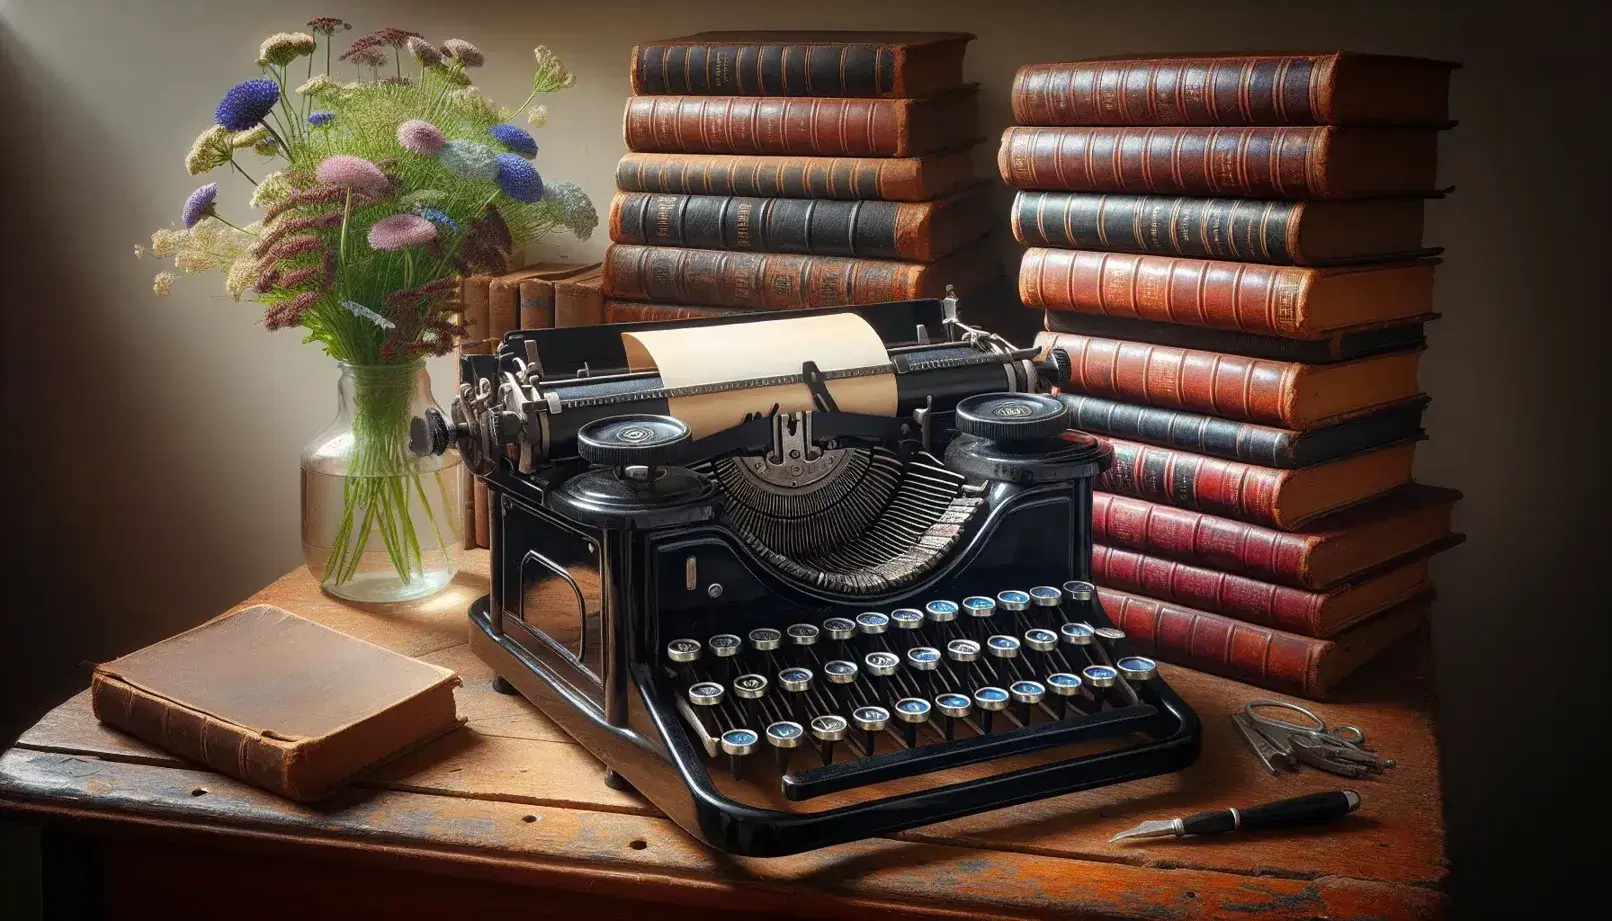 Vintage early 20th-century typewriter with black keys on a wooden desk, accompanied by worn leather-bound books and a vase of wildflowers.